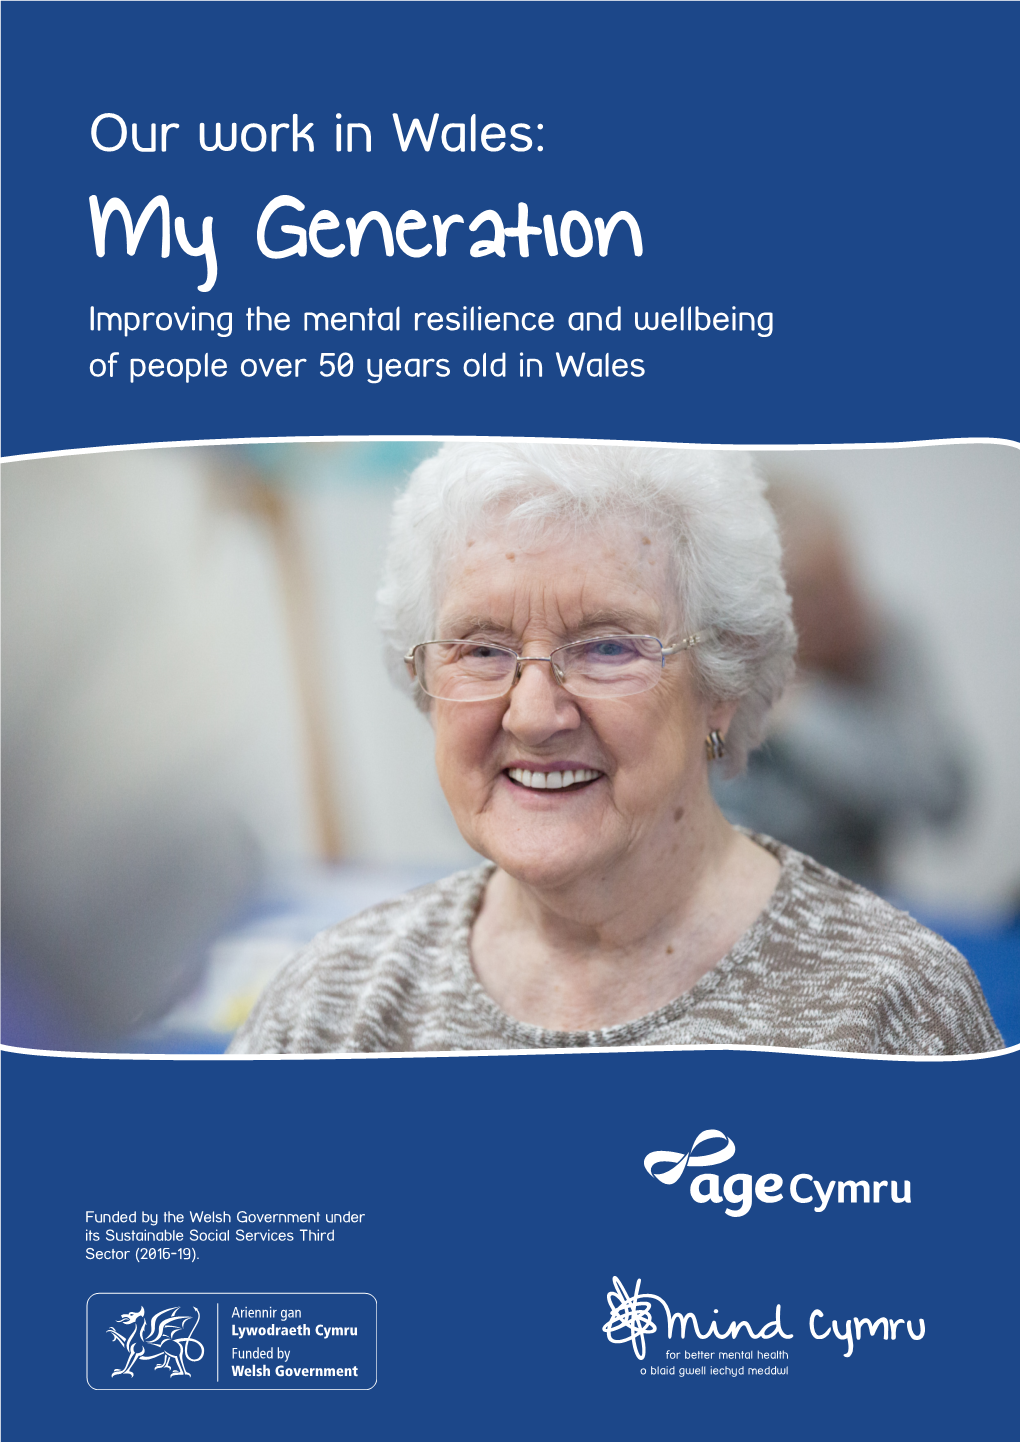 My Generation Improving the Mental Resilience and Wellbeing of People Over 50 Years Old in Wales